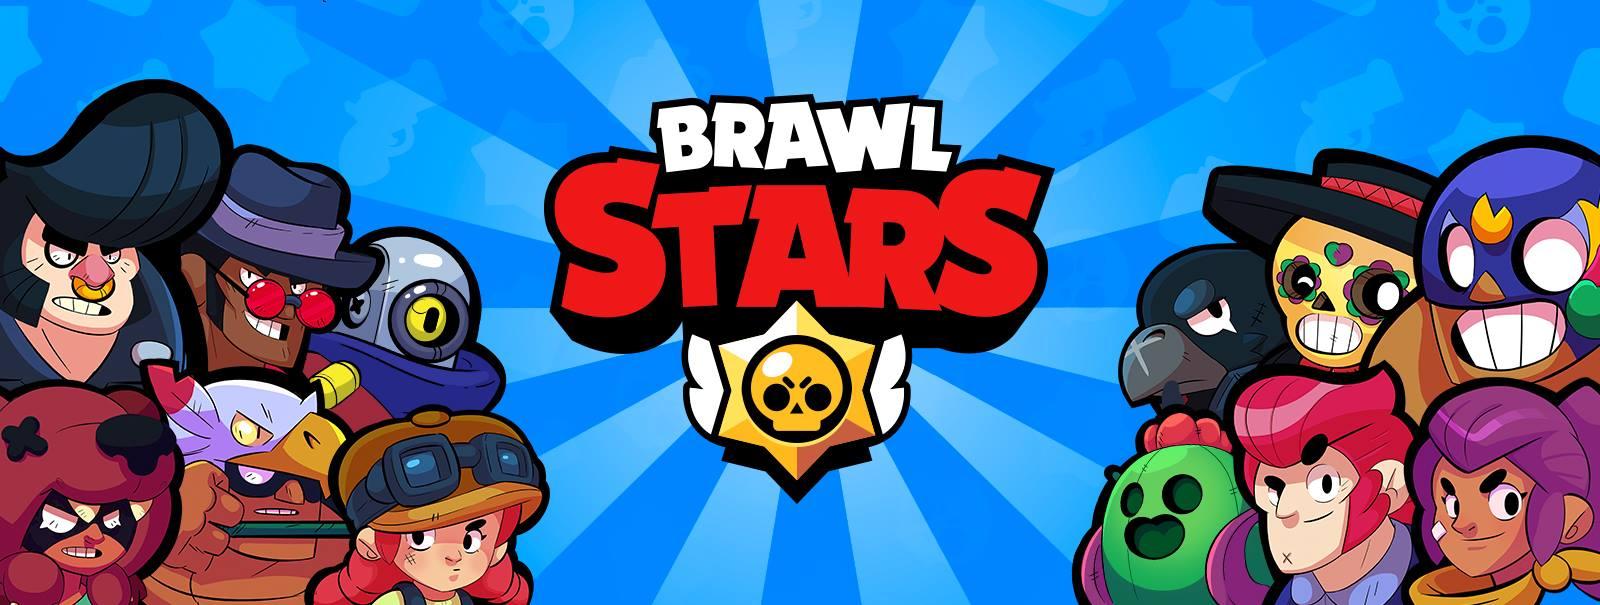 Brawl Stars busts loose on Android with app's global release